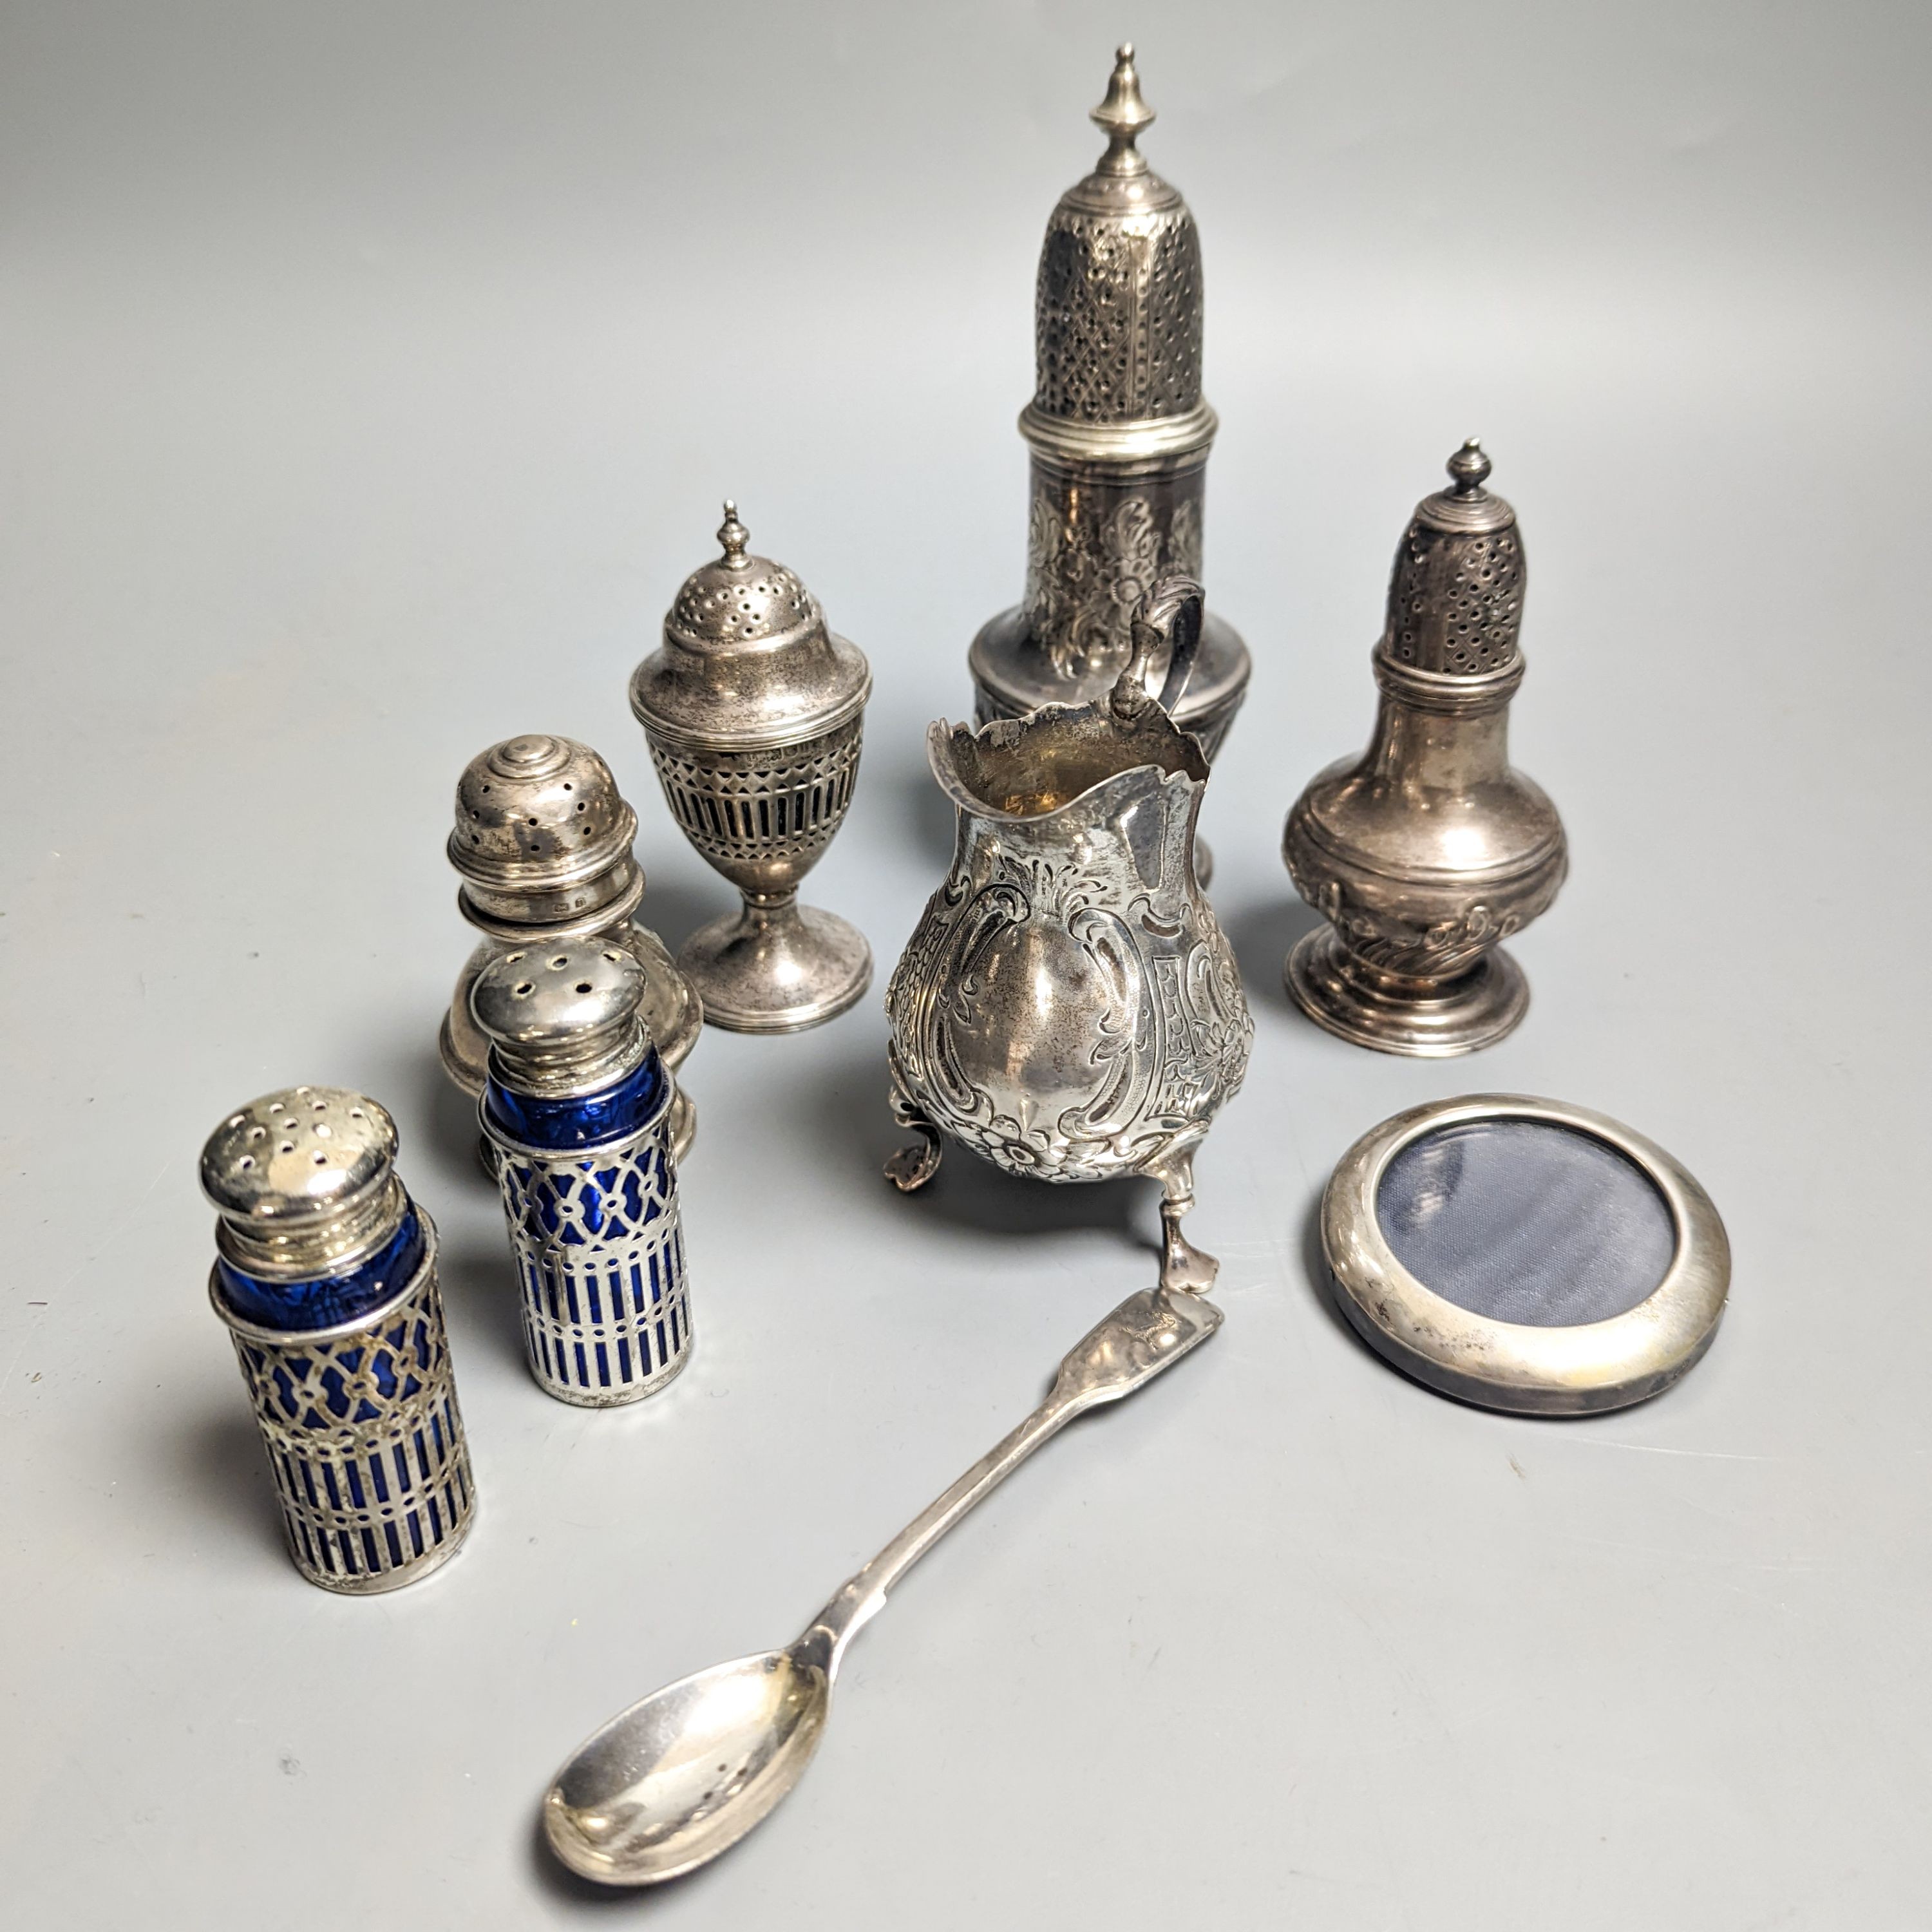 A Victorian embossed silver cream jug, London, 1883, 92mm, two 18th century silver pepperettes, one with plated cover, four later condiments (two silver), a silver spoon and small 800 standard photograph frame.